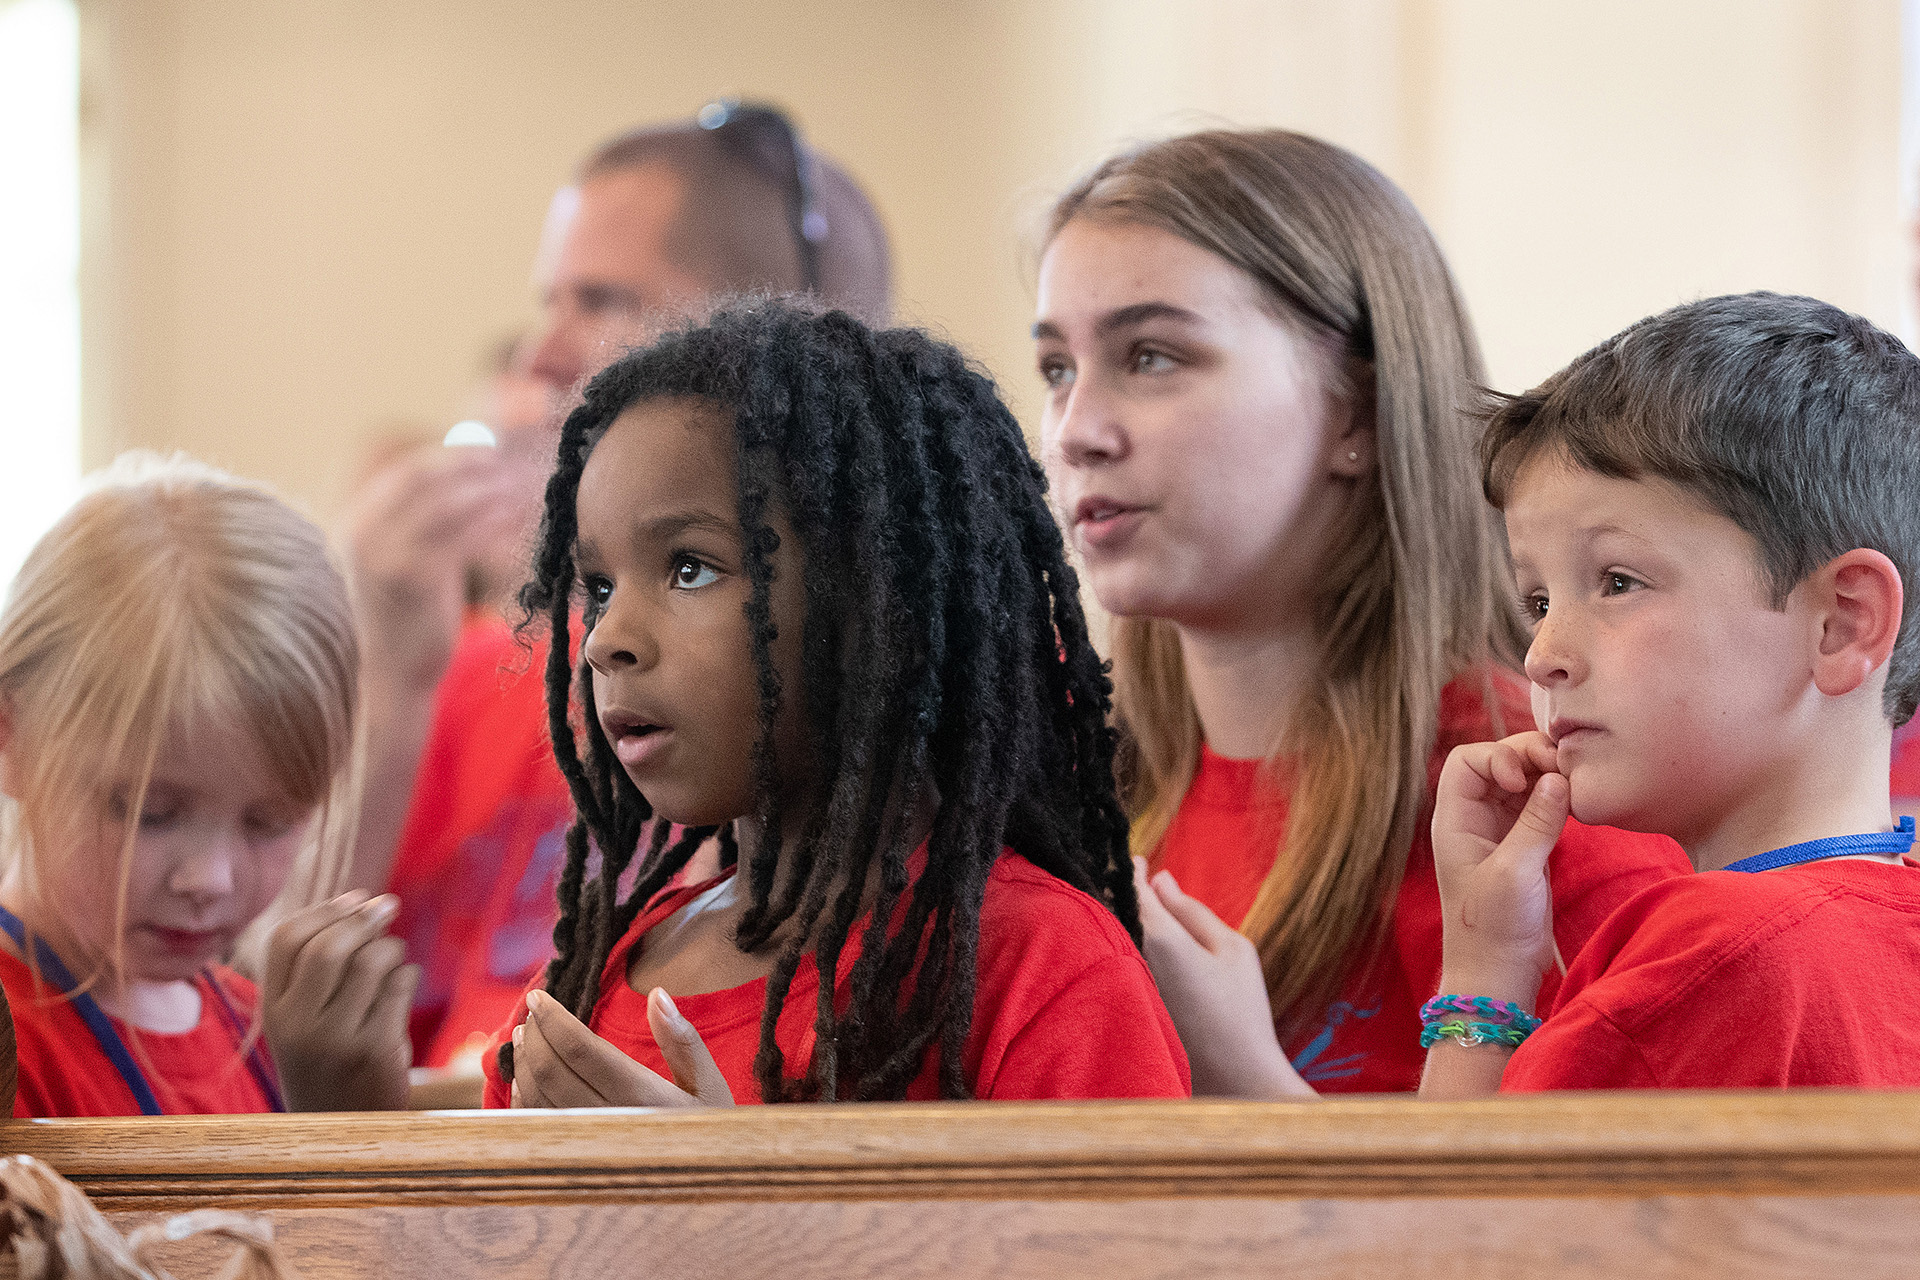 Children listen to a lesson during vacation Bible school at Connell Memorial United Methodist Church in Goodlettsville, Tenn. From left are: Abby Hartmann, Emma Furtado, Emme Sinclair Krueger and Barrett Christian. Photo by Mike DuBose, UM News.